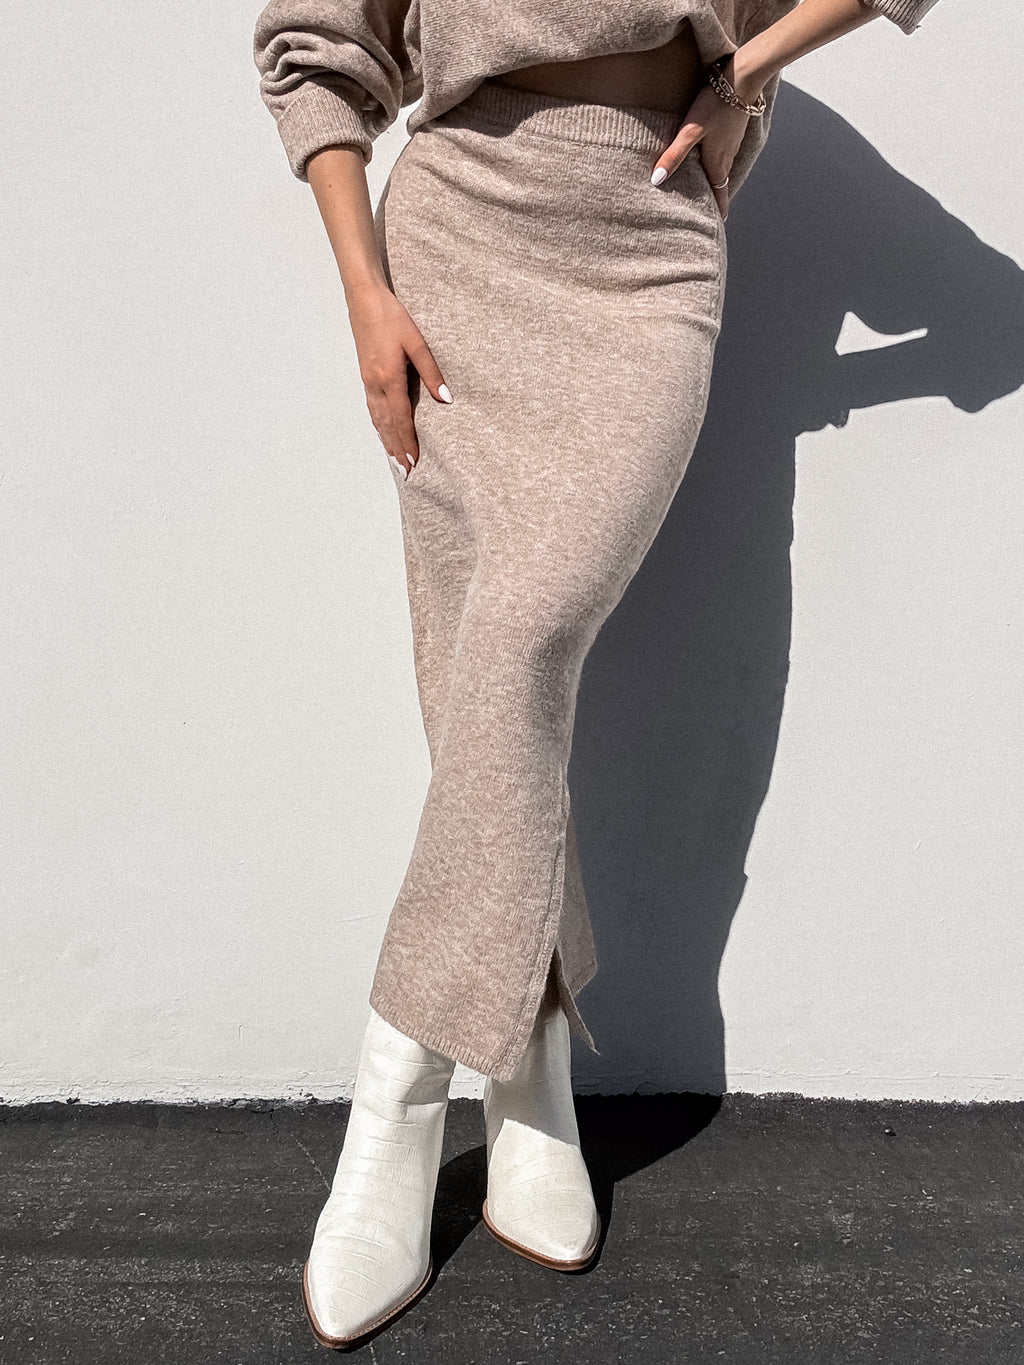 Dawson Knit Midi Skirt in Oat - Final Sale - Stitch And Feather